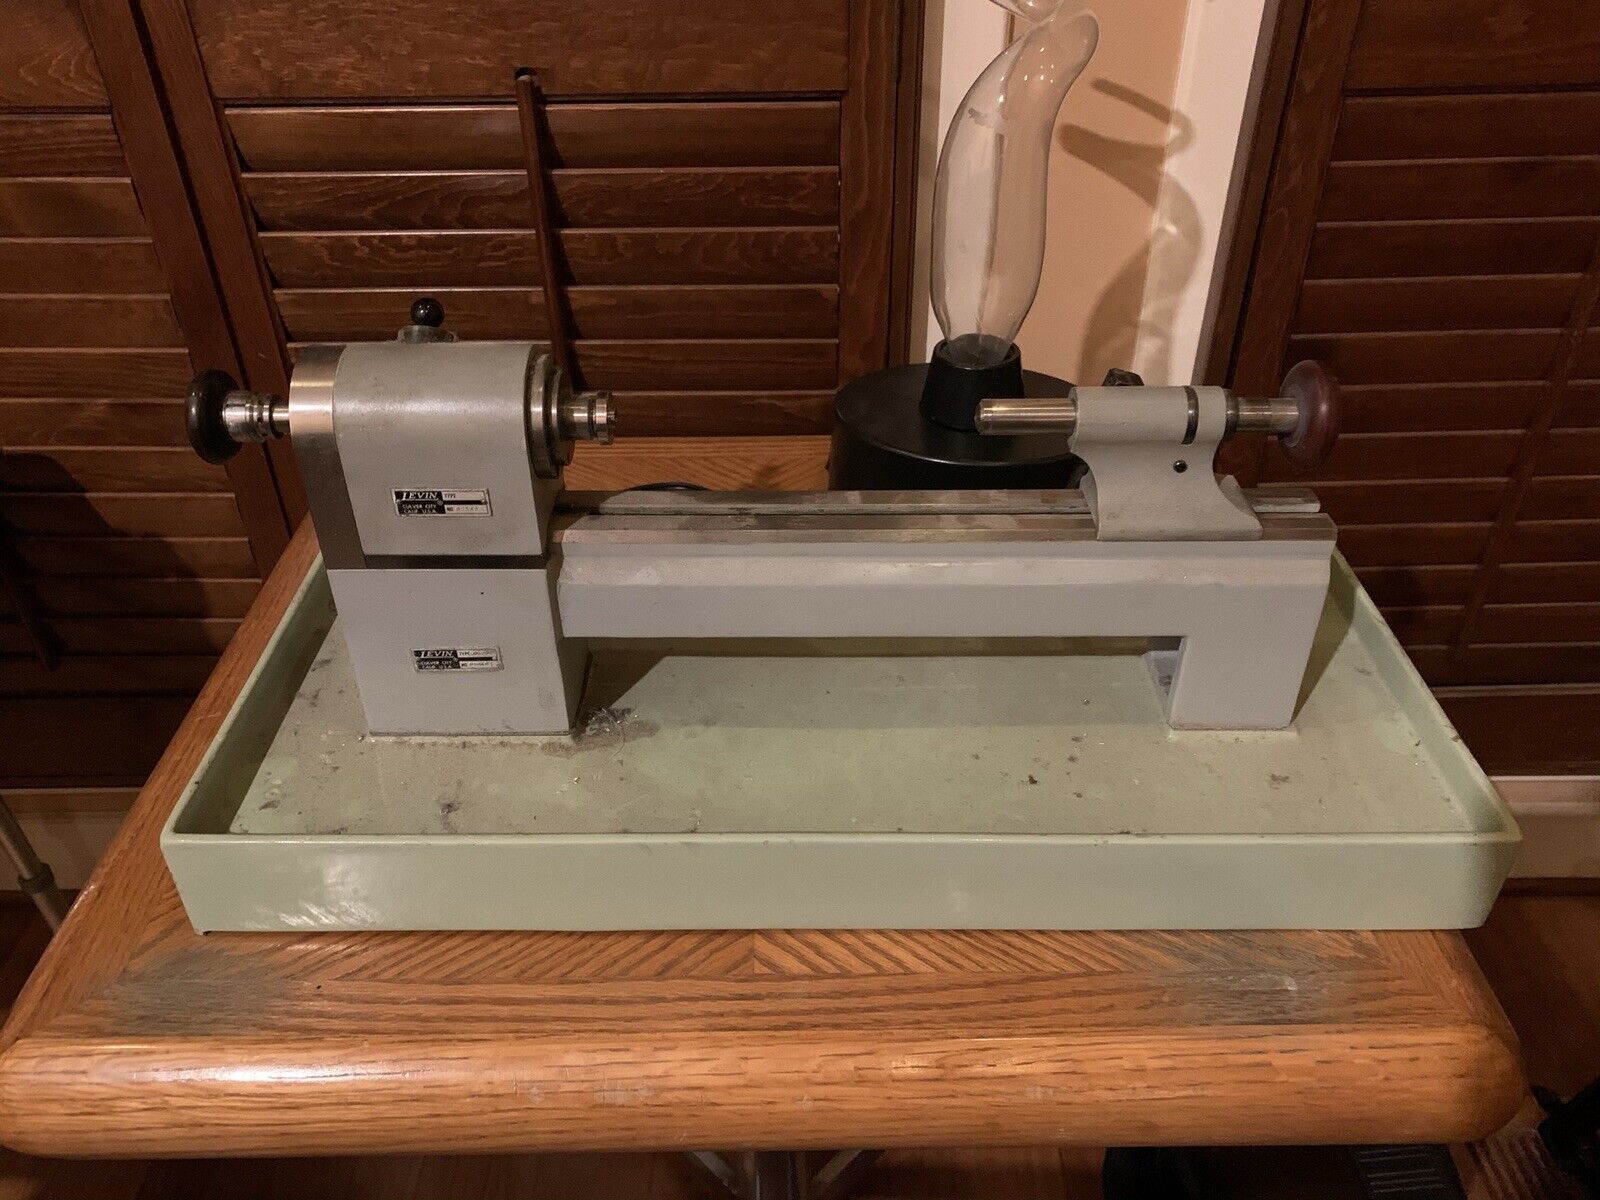 Levin Watchmakers lathe type 009202